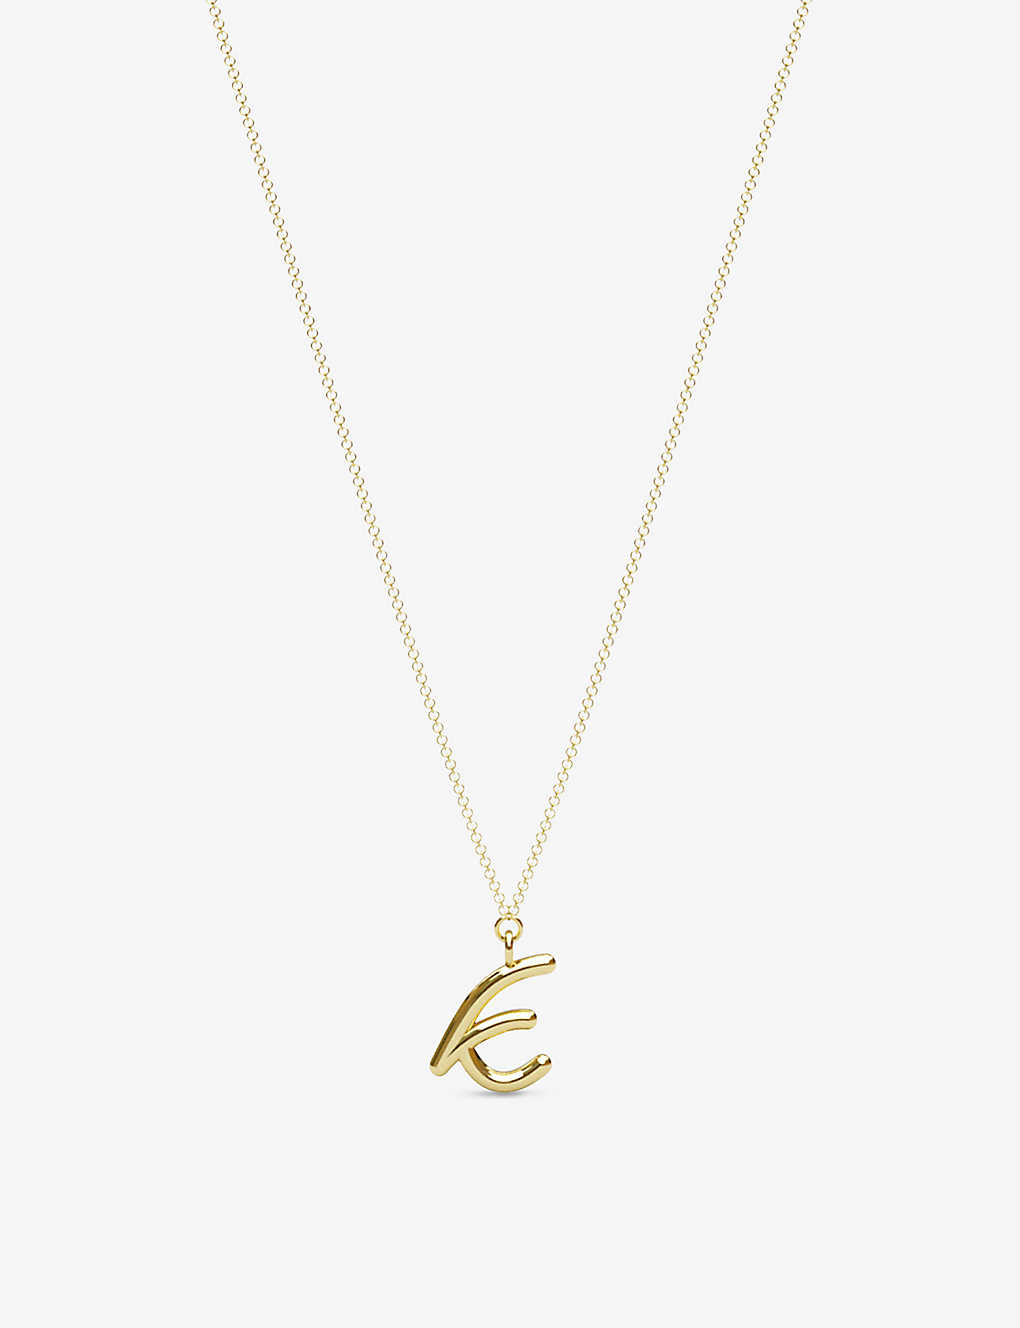 Shop The Alkemistry Womens 18ct Yellow Gold Love Letter K Initial 18ct Yellow-gold Pendant Necklace